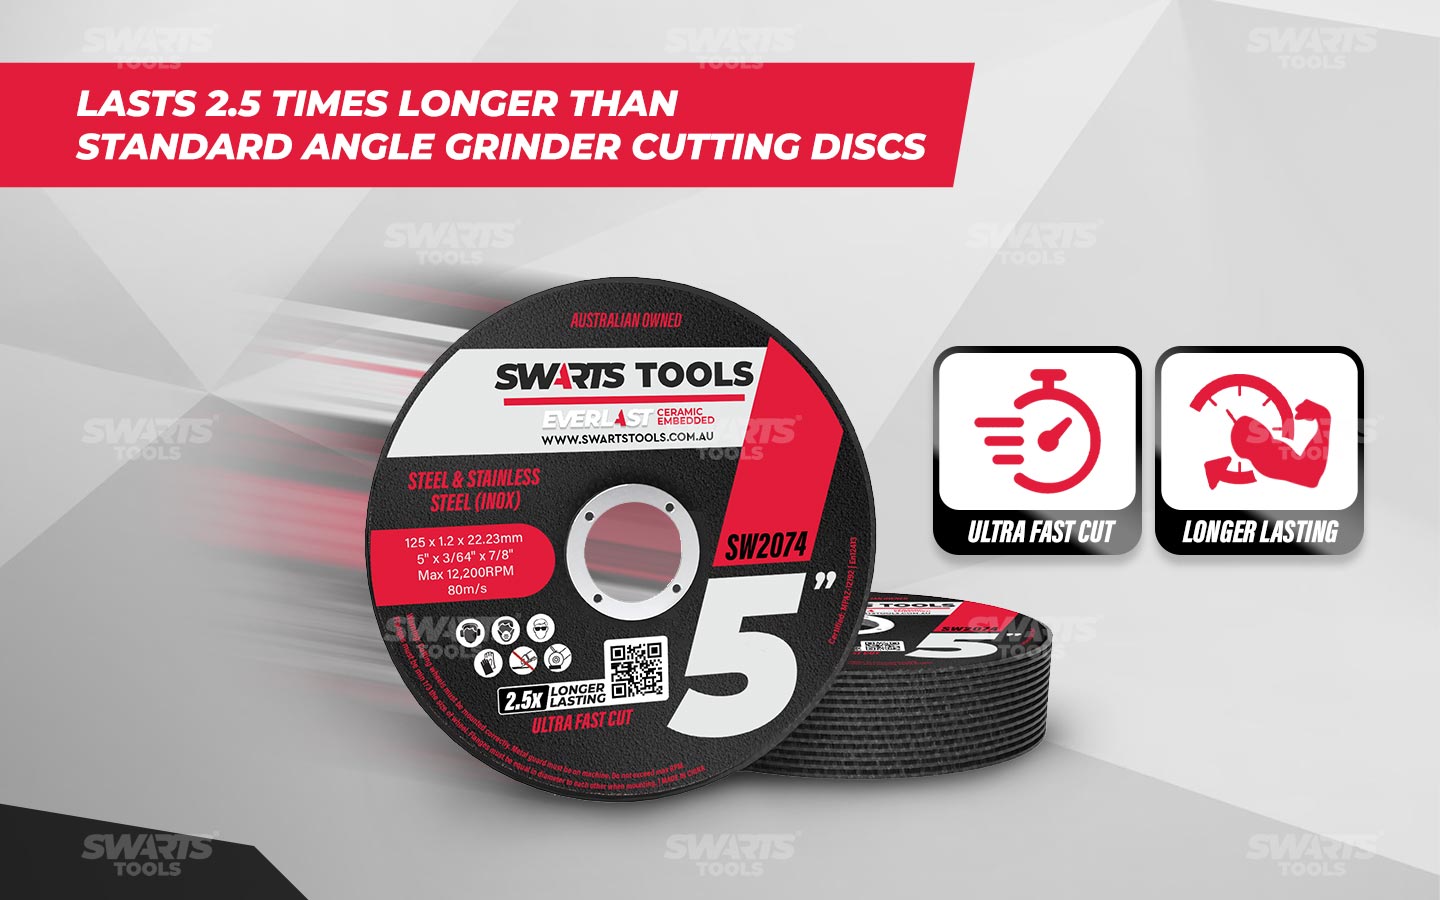 lasts 2.5 times longer than standard angle grinder cutting discs